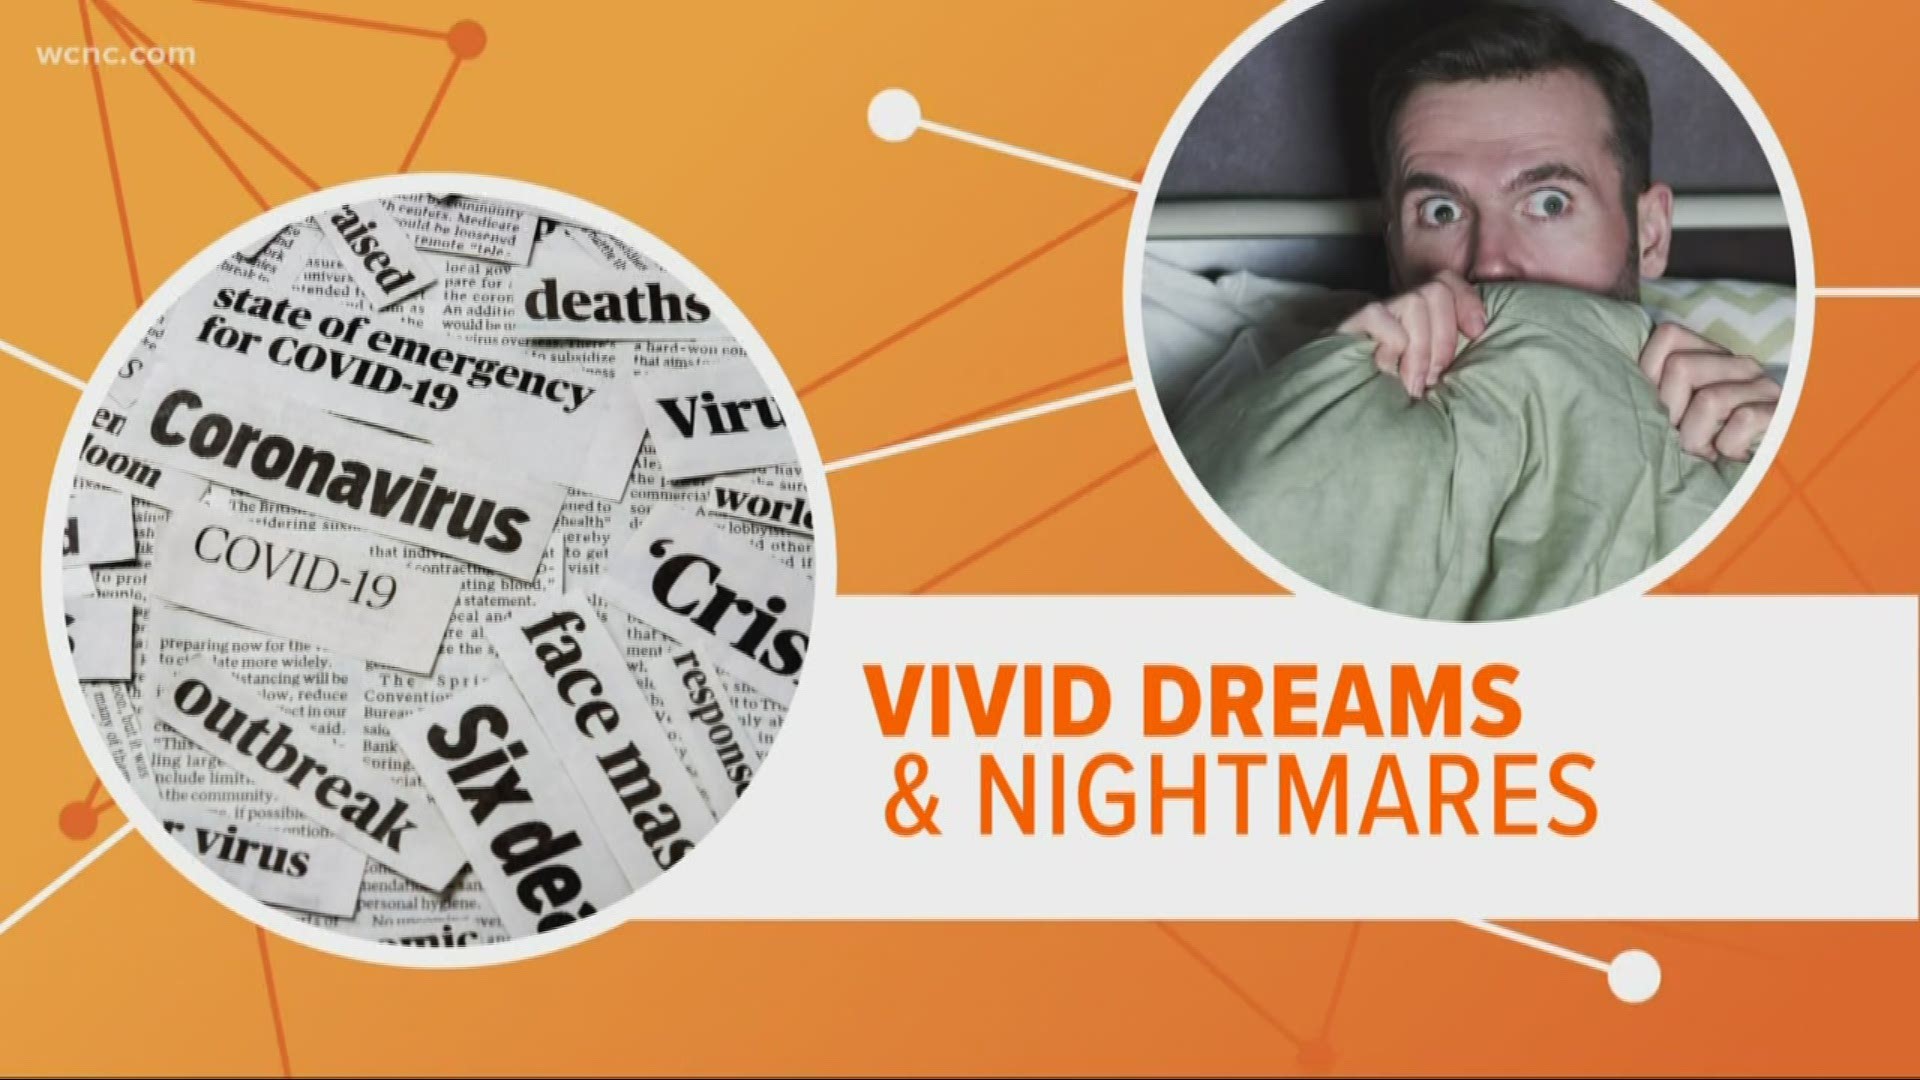 The coronavirus pandemic is affecting more than our health. Researchers say we're having more vivid dreams and nightmares during the crisis.